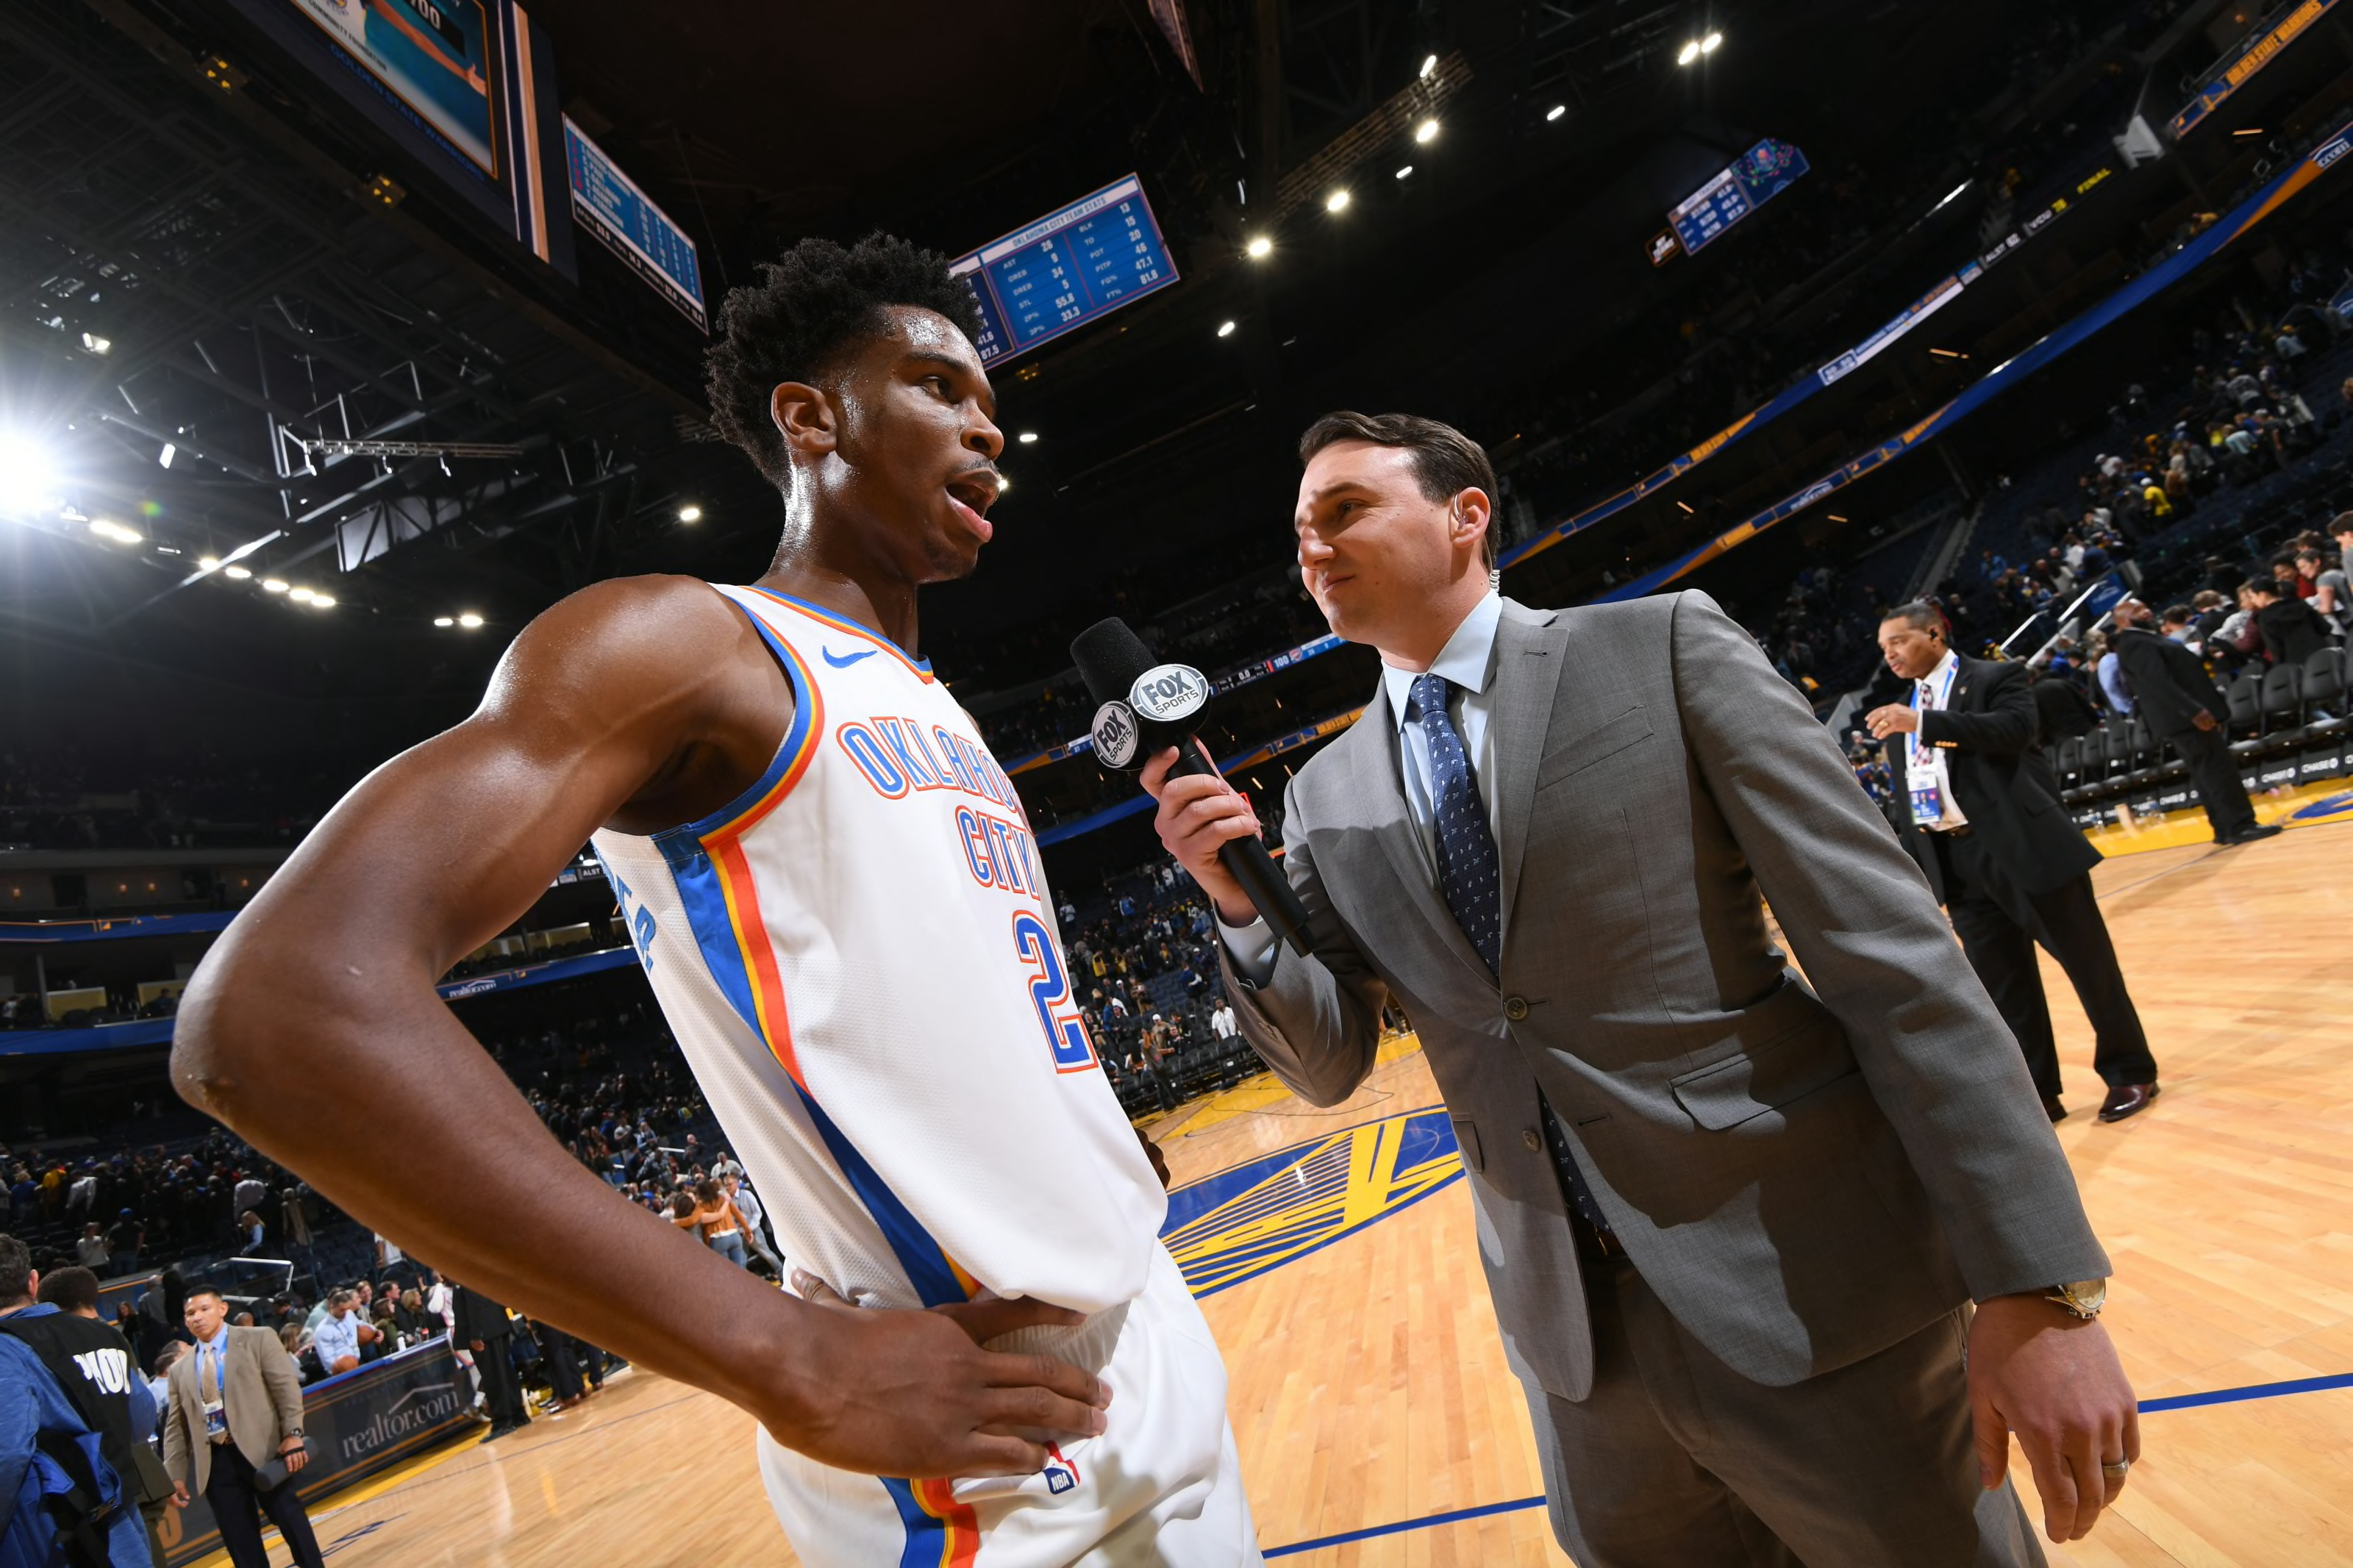 OKC Thunder come back vs. Warriors to capture first road win of season